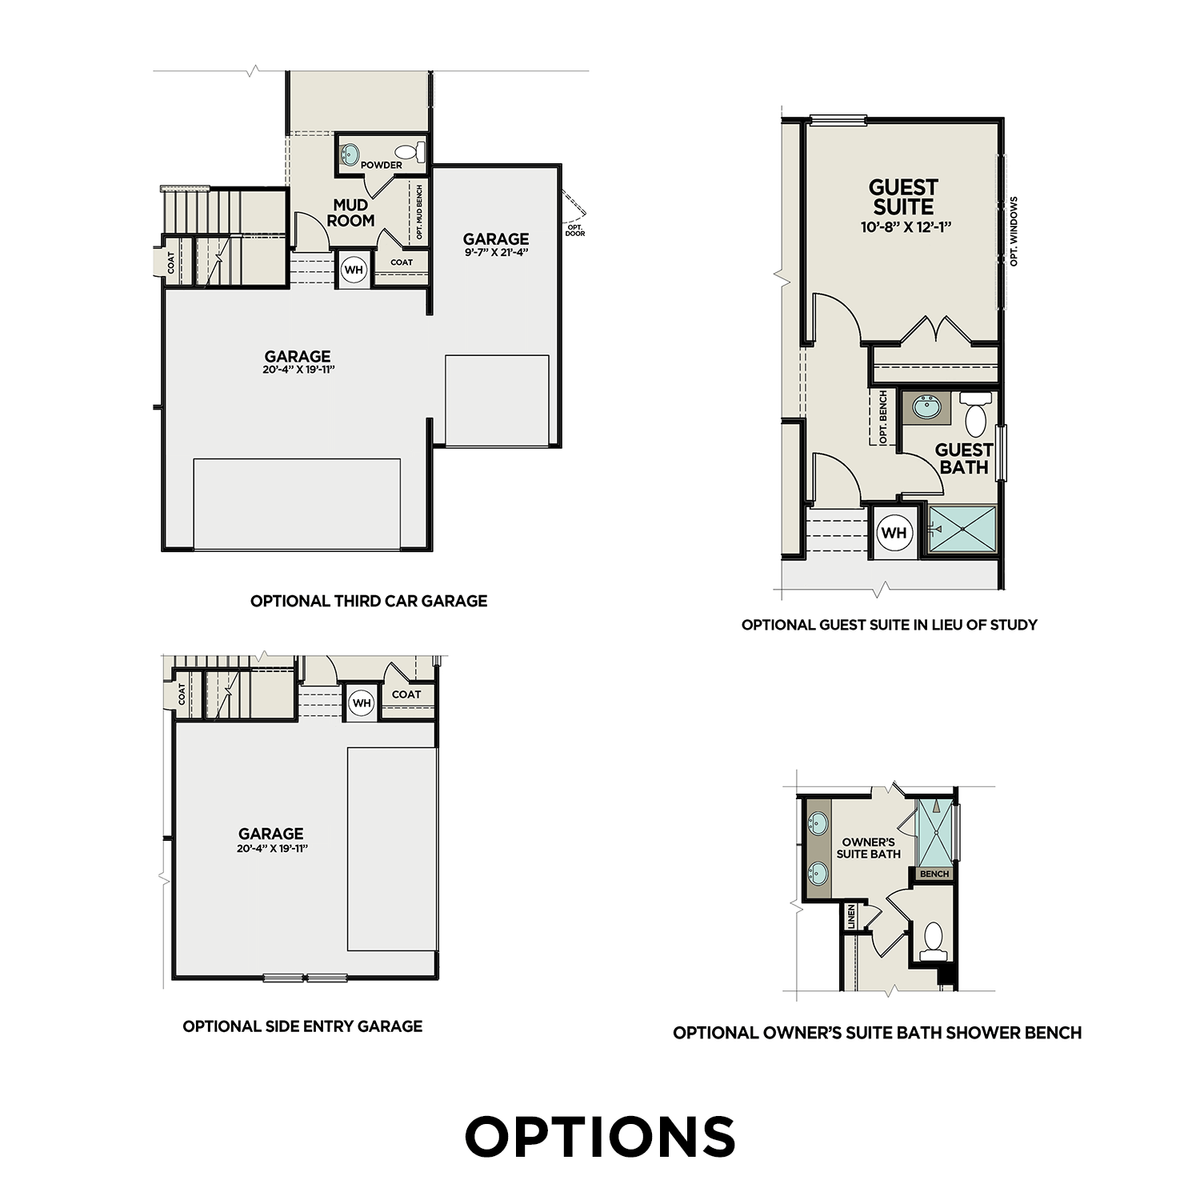 4 - The Willow D floor plan layout for 31 Ridgeline Way in Davidson Homes' Mountainbrook community.